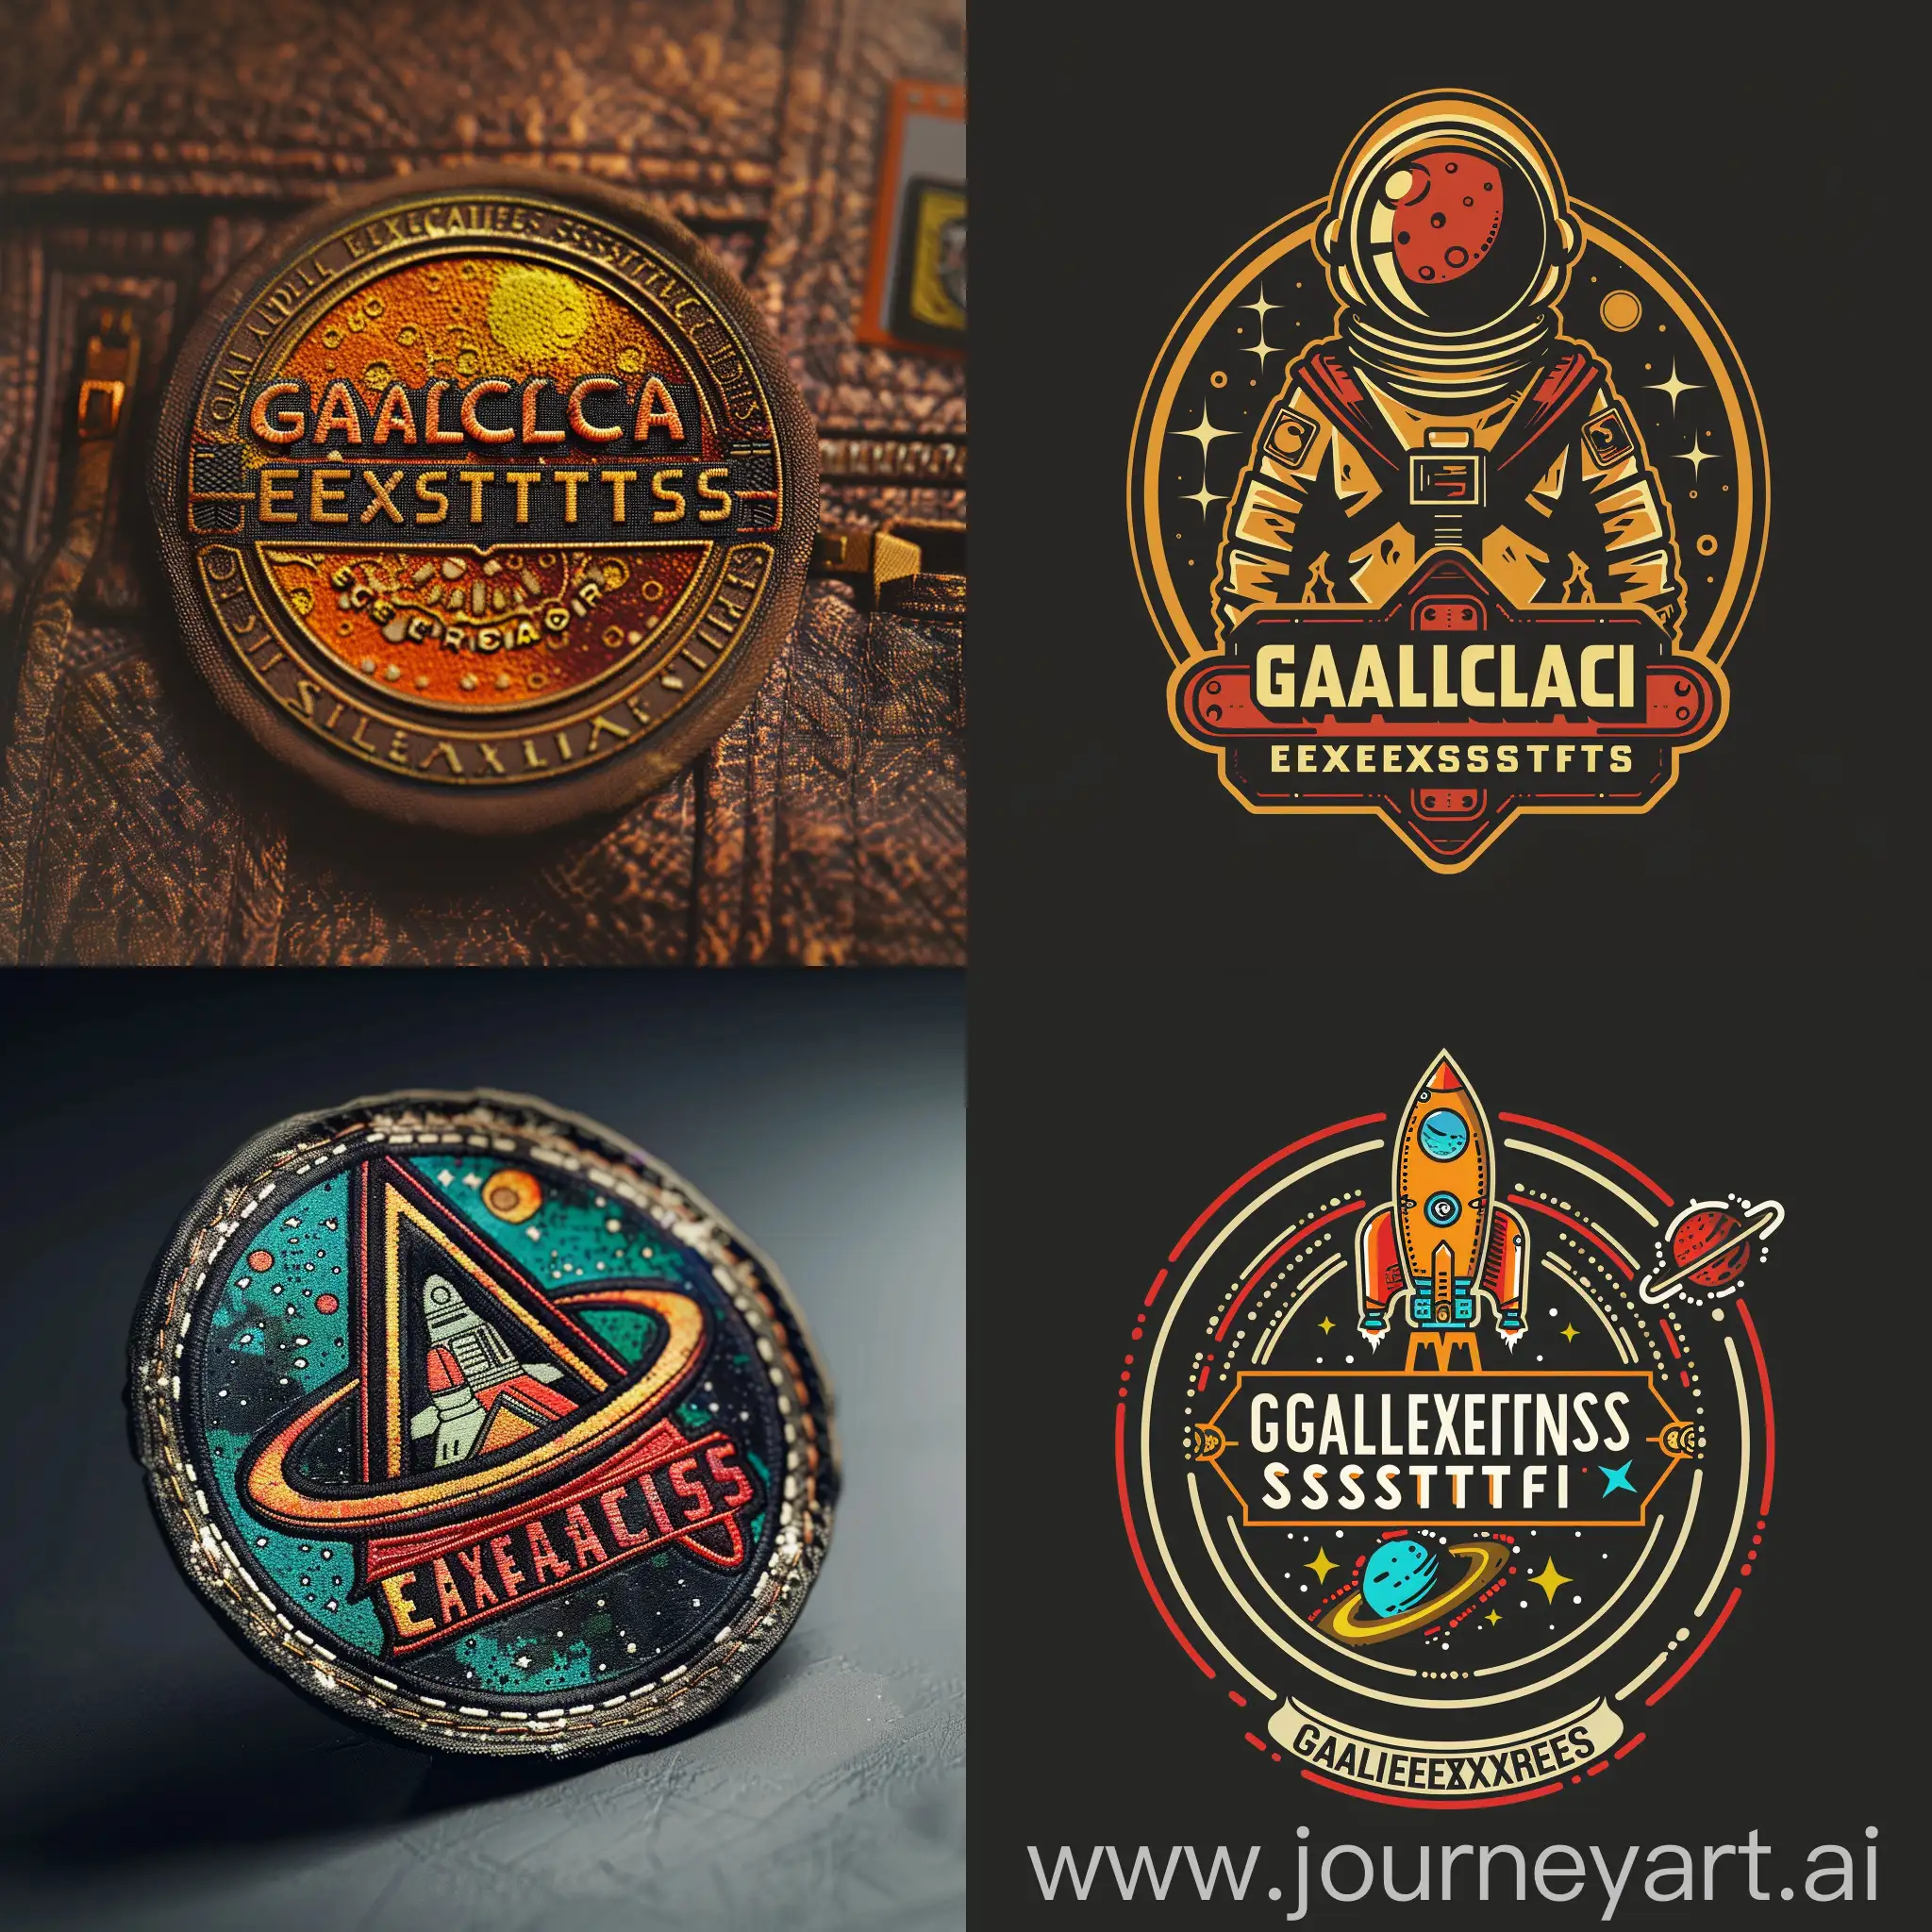 Design a logo for a fictional organization called 'Galactic Explorers Society' in the style of a 1960's Sci-Fi aesthetic. This logo will be used as a patch on the Astronaut uniforms of characters in a Live-Action Among Us movie.